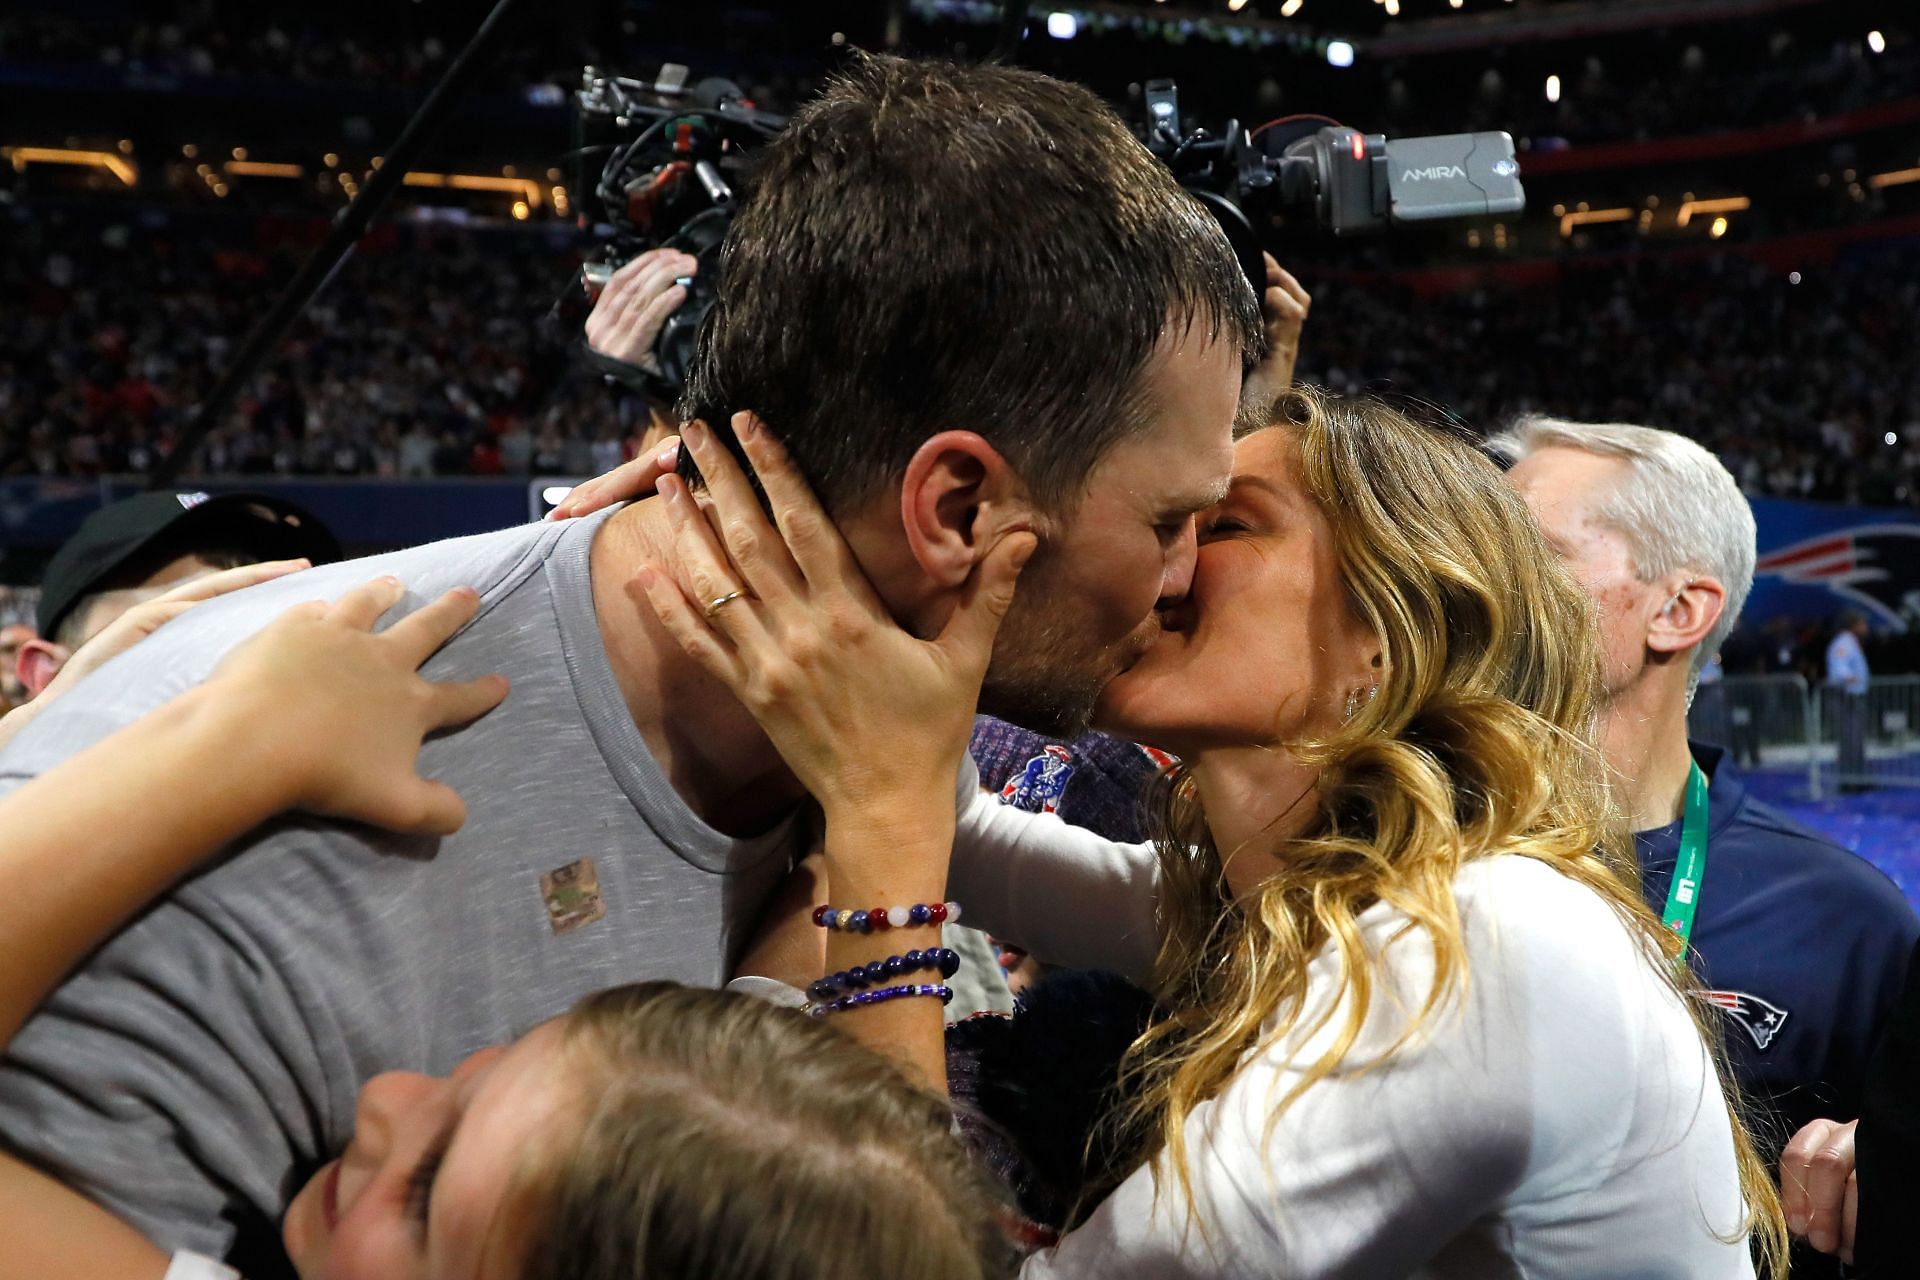 The quarterback with the New England Patriots and wife Gisele